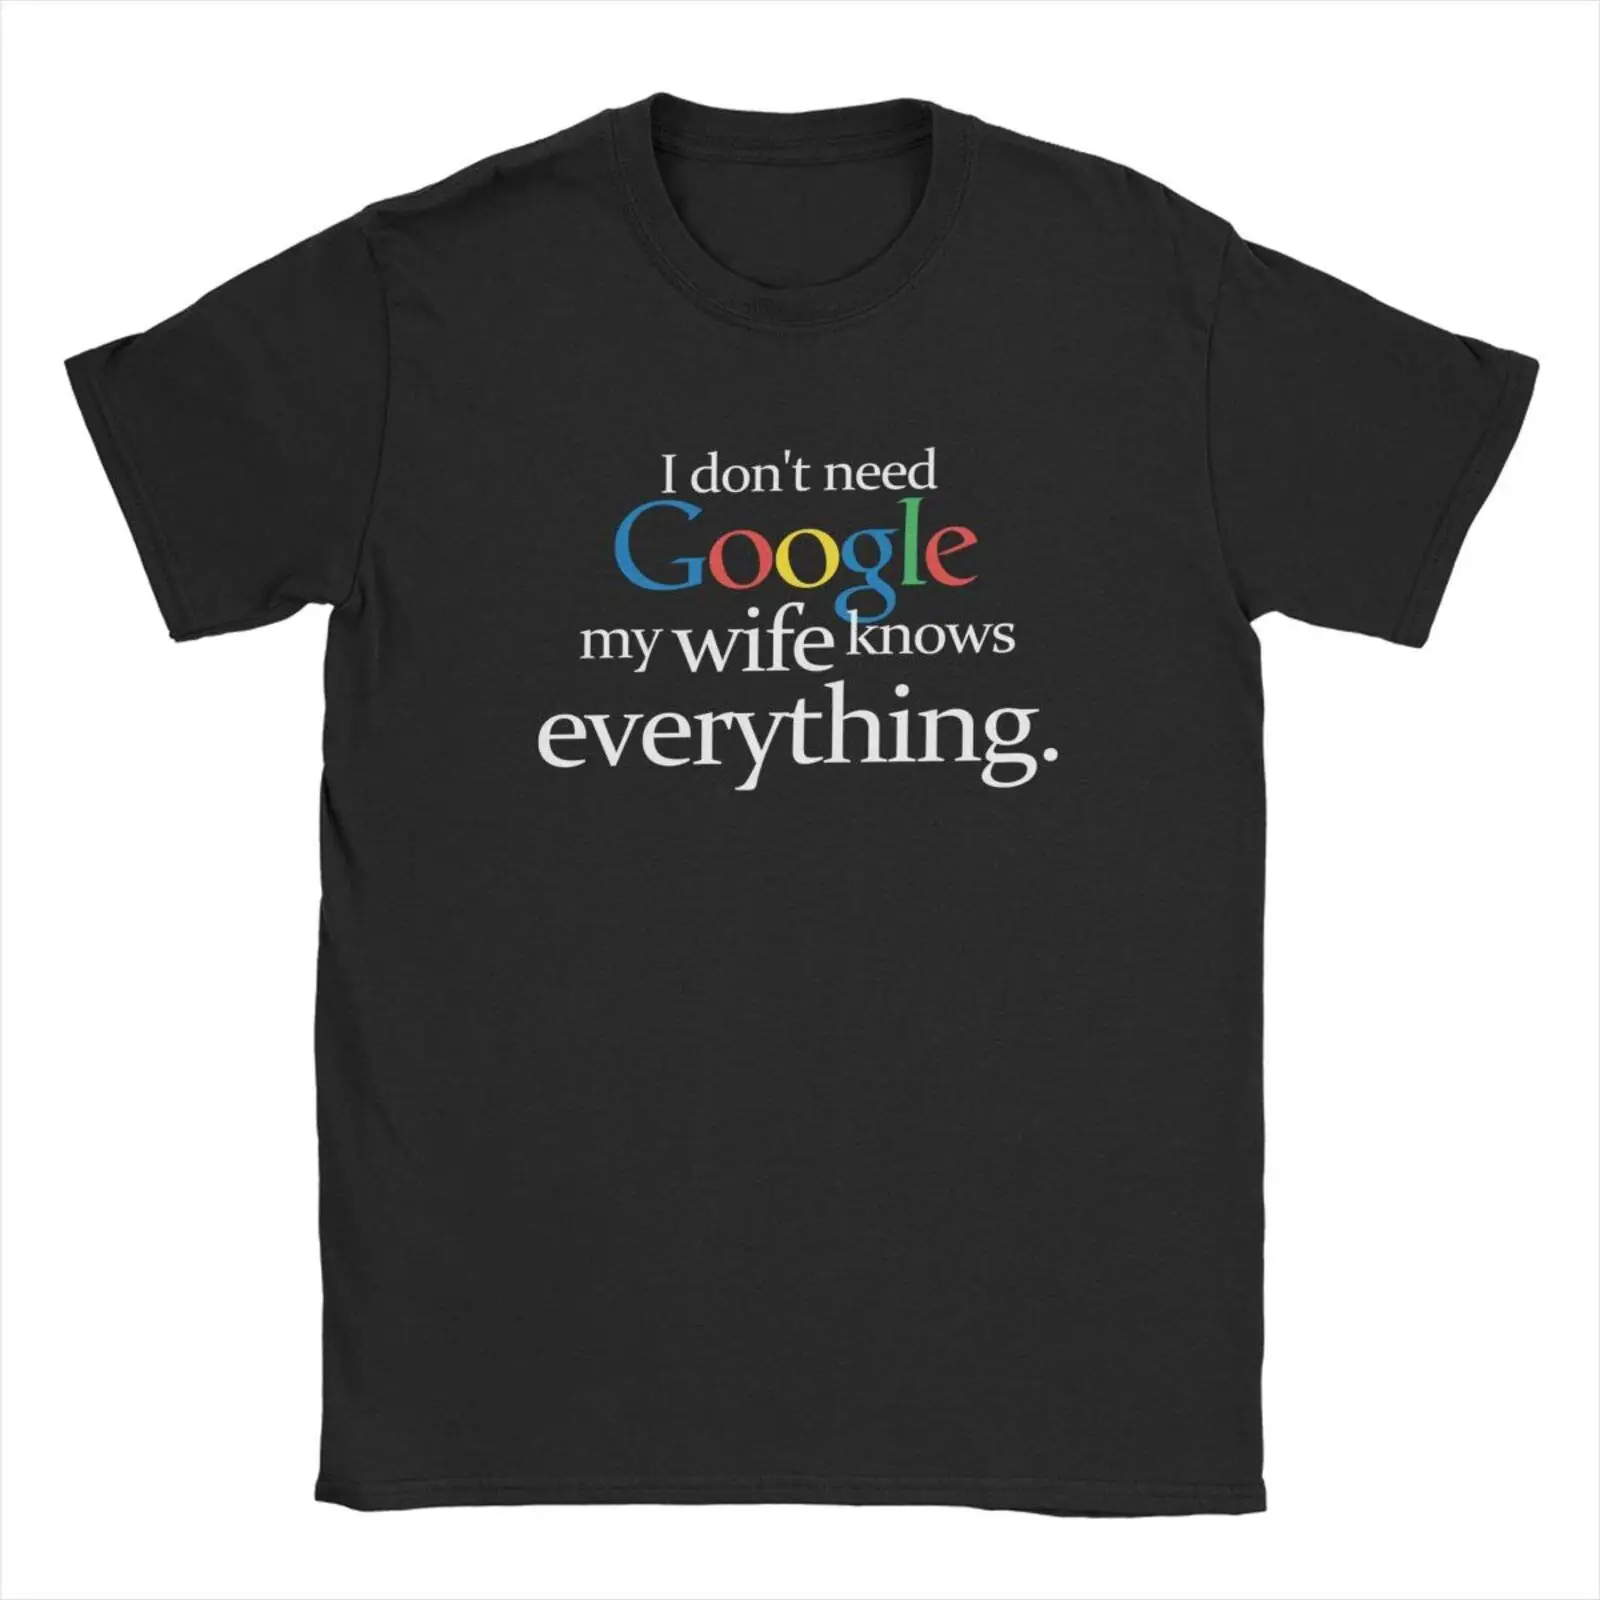 

I Don't Need Google My Wife Knows Everything Funny T-Shirt Husband Dad Groom Fiance Tops Tees for Men Clothes